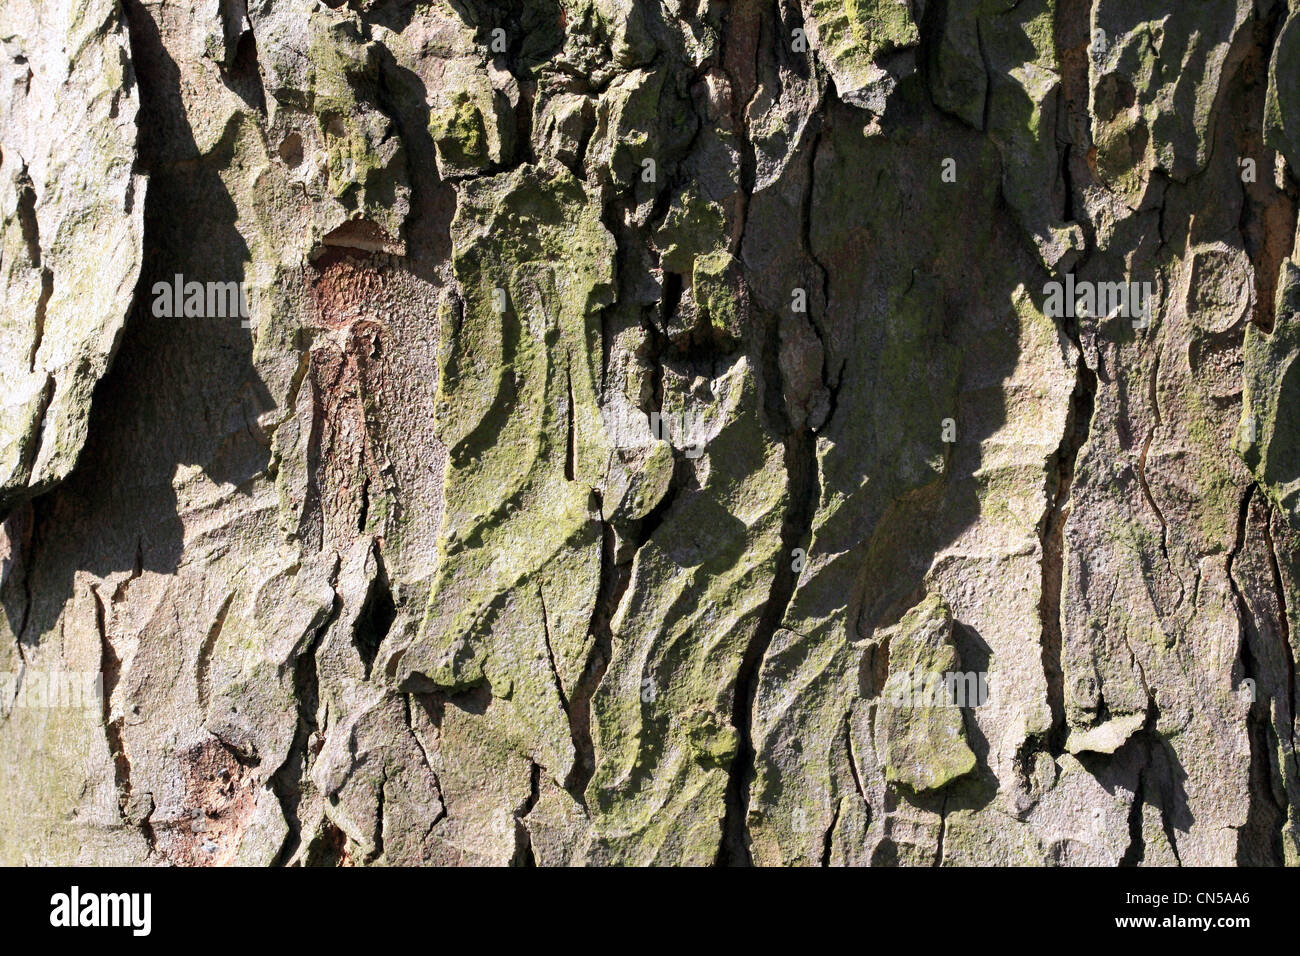 Tree Bark Texture patterned outer skin of woodland timber Stock Photo